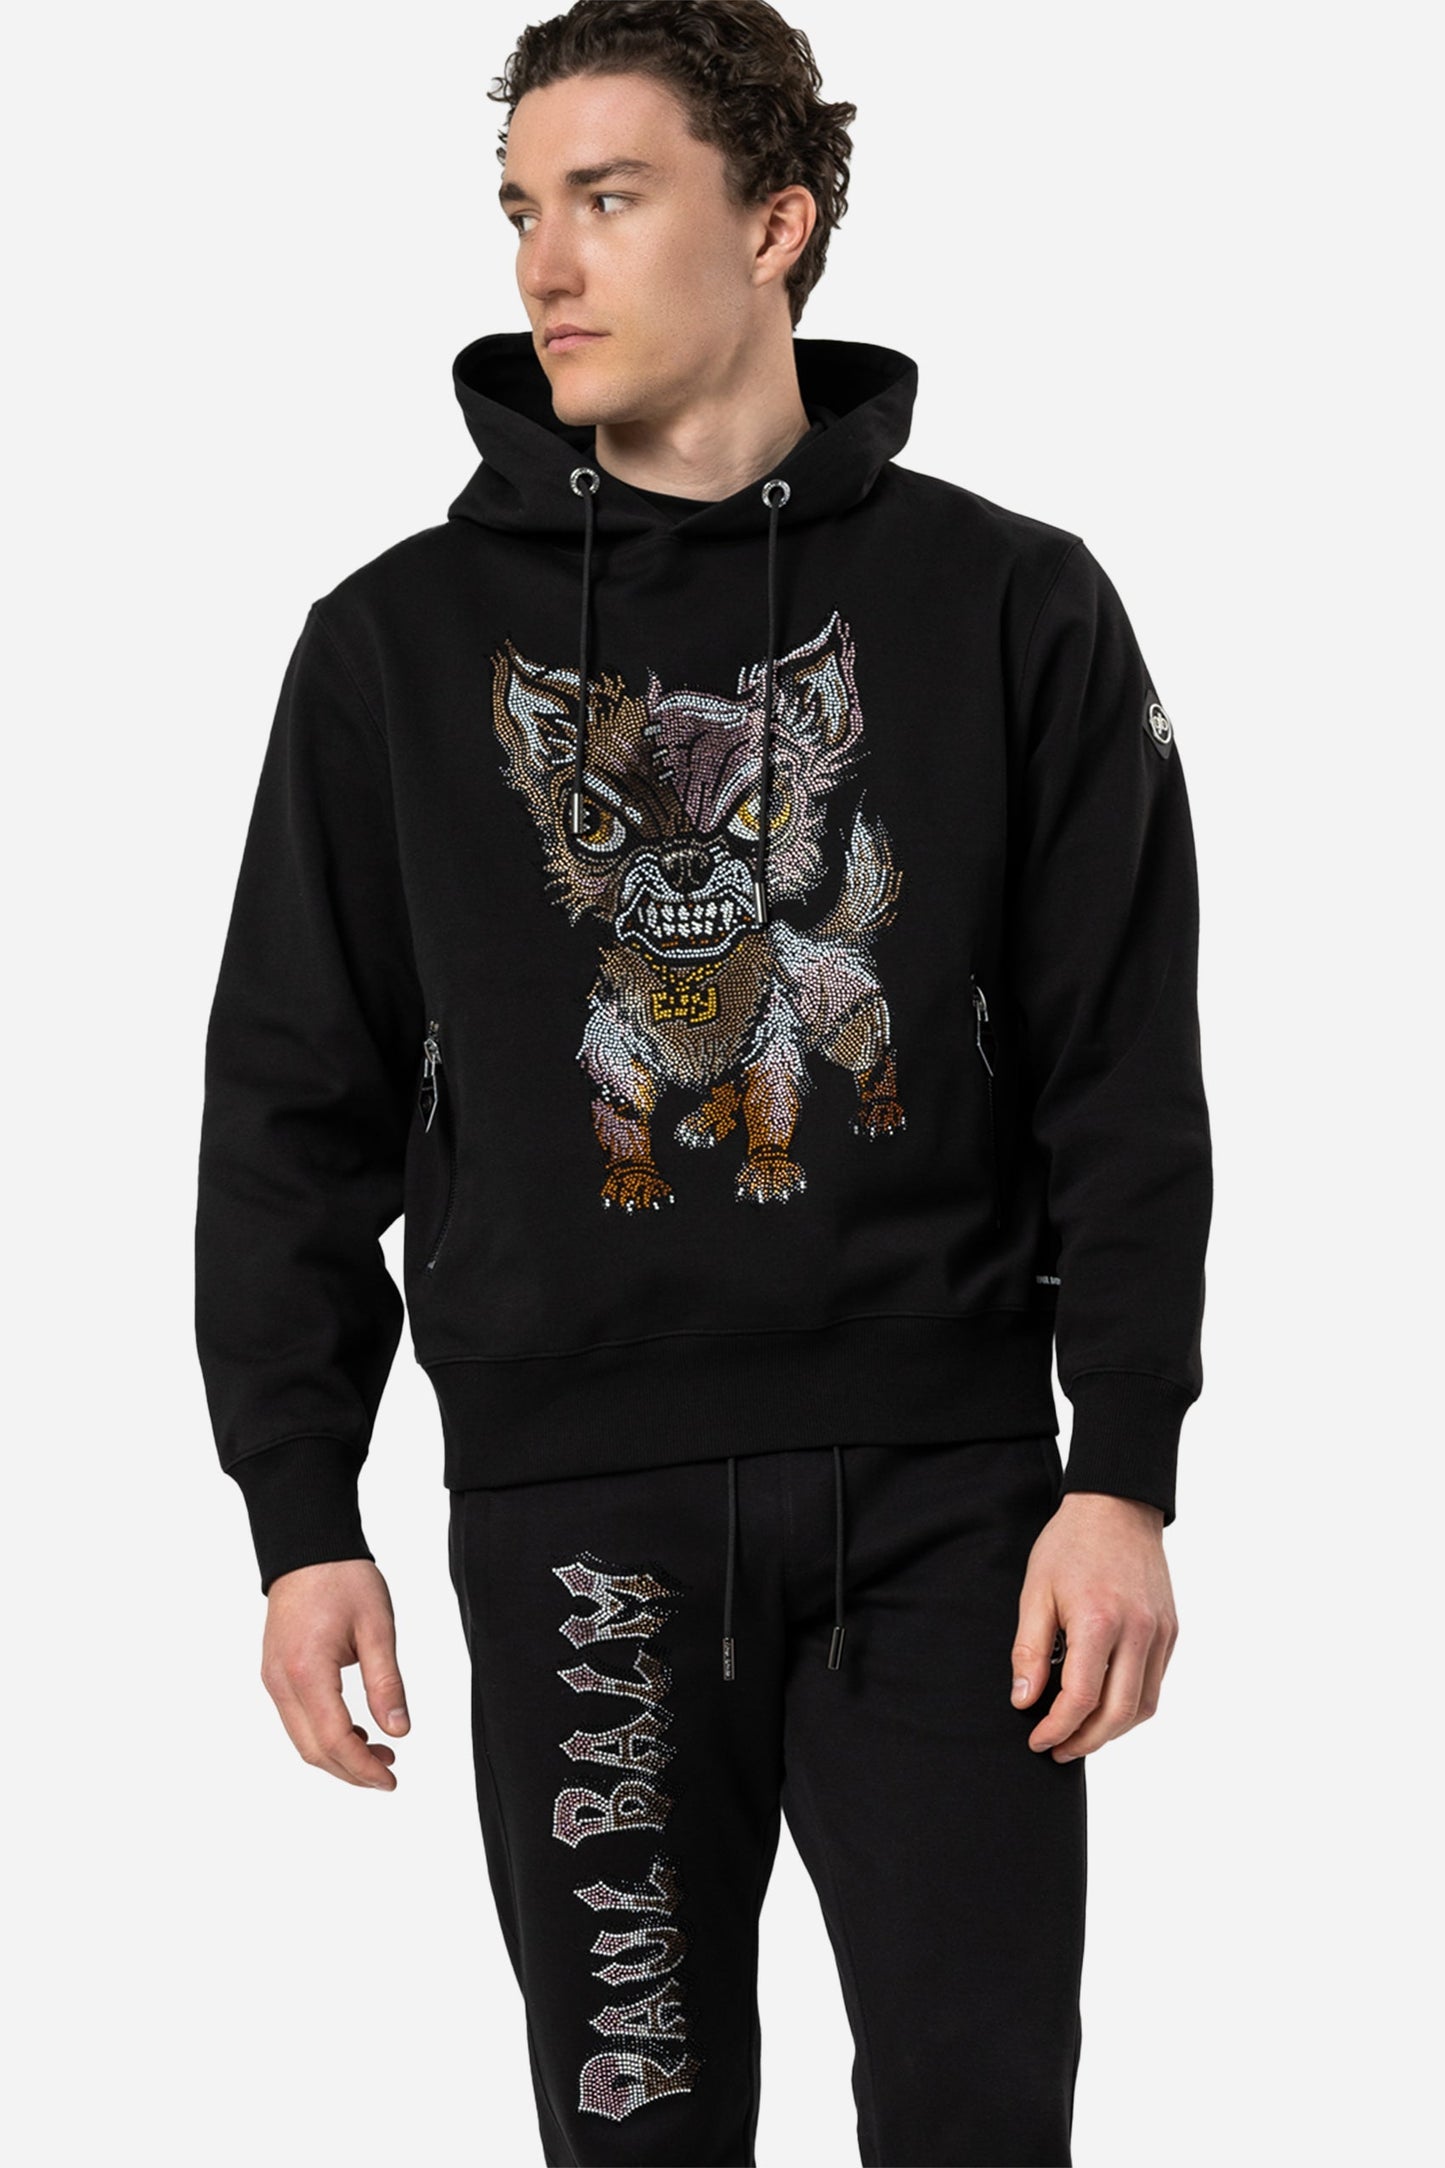 Hoodie Elly Angry Strass – Limitiert auf 300